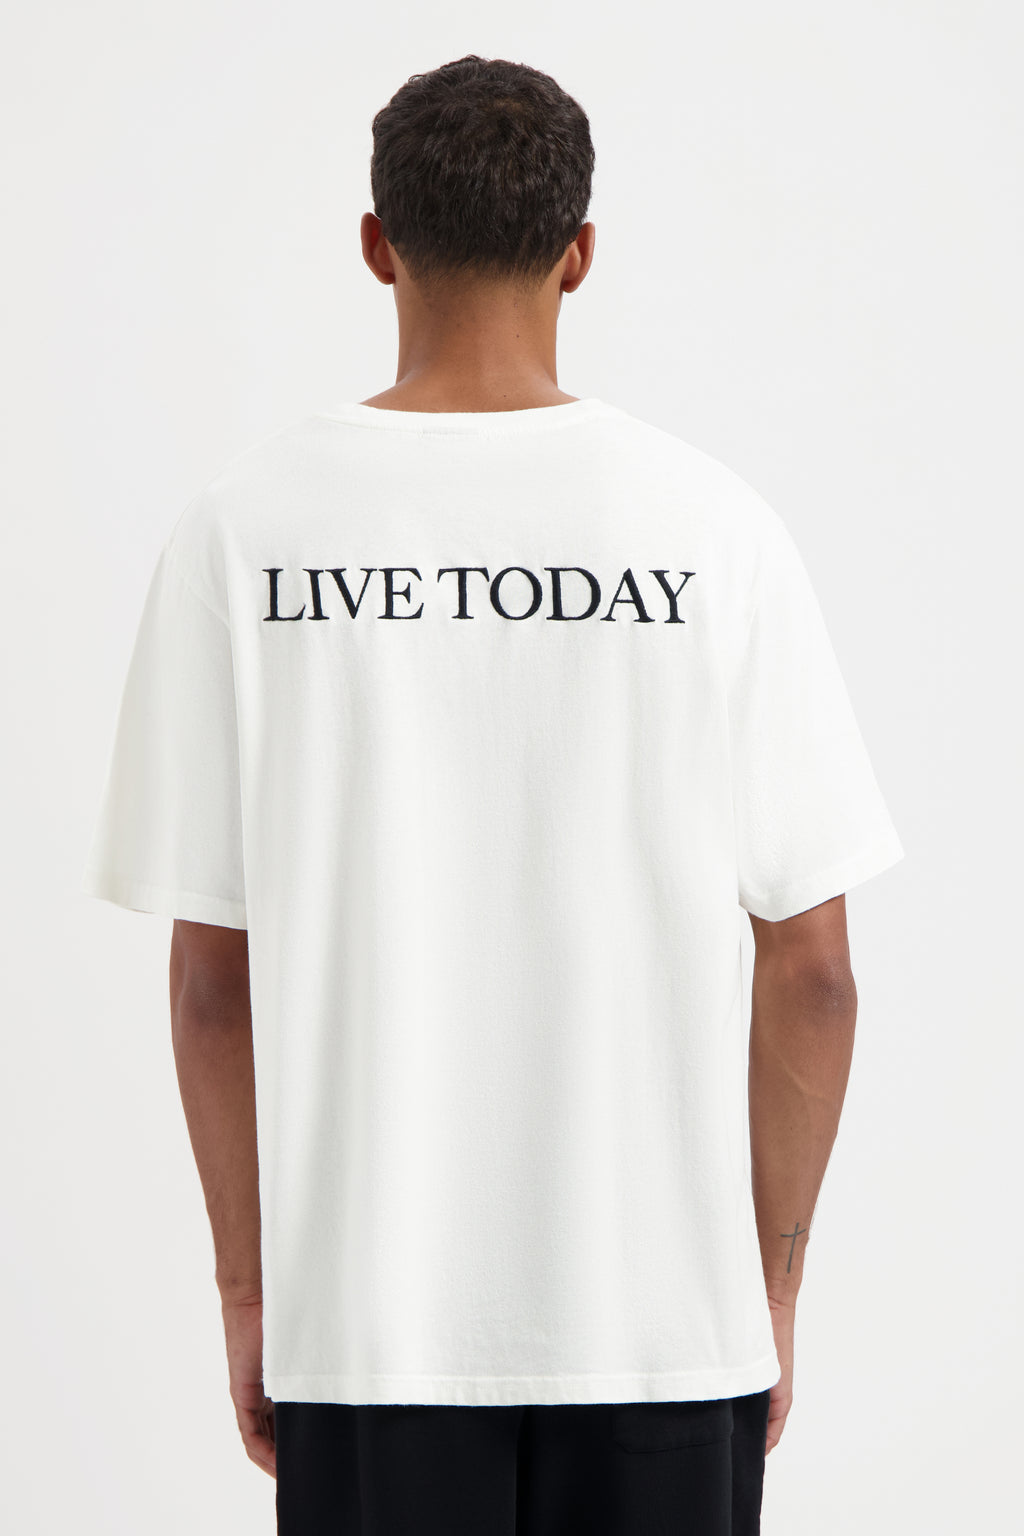 LIVE TODAY T-SHIRT